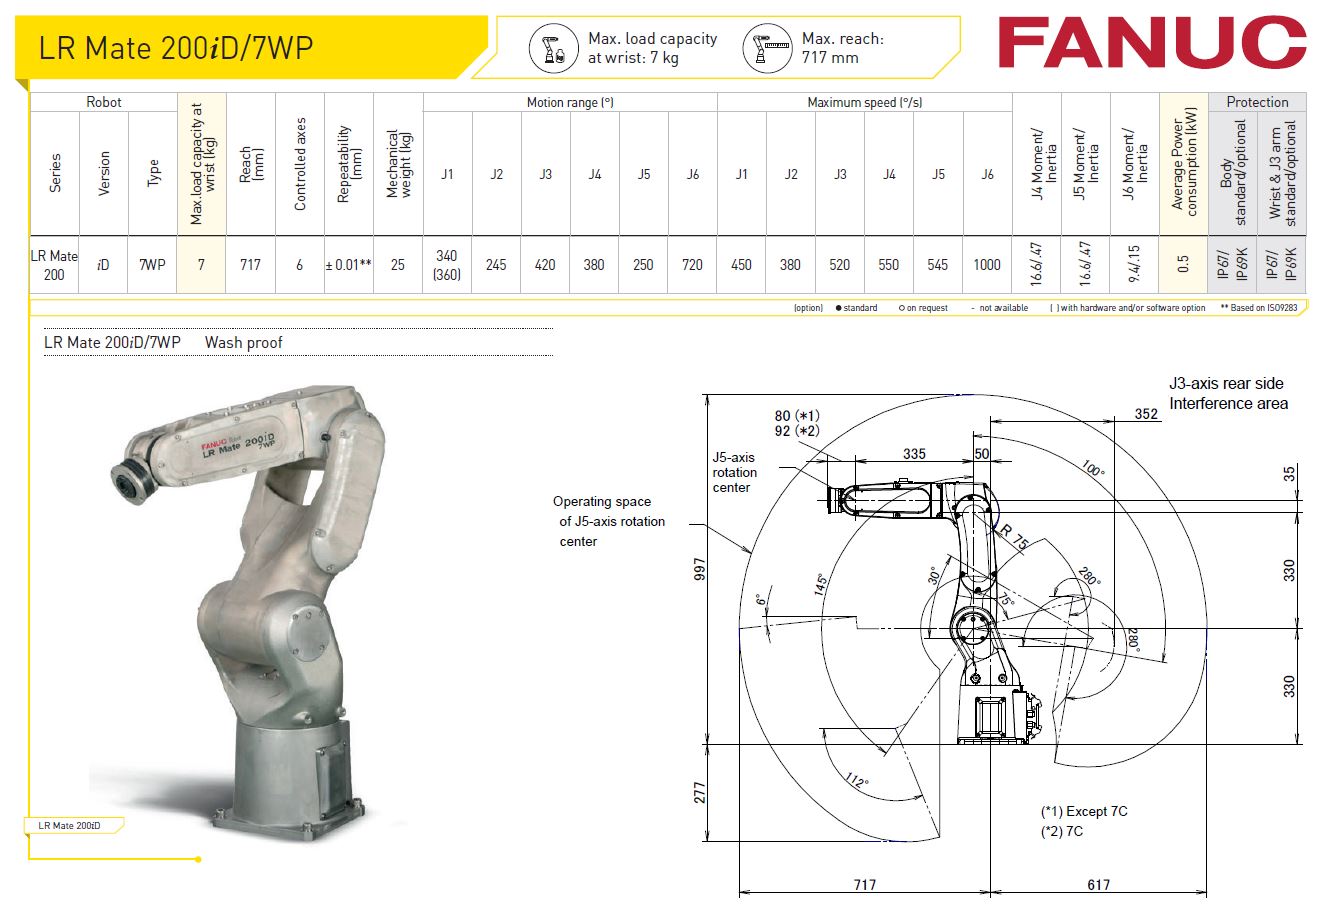 LR Mate 200iD-7WP Fanuc Robot Specification from Robot World Automation